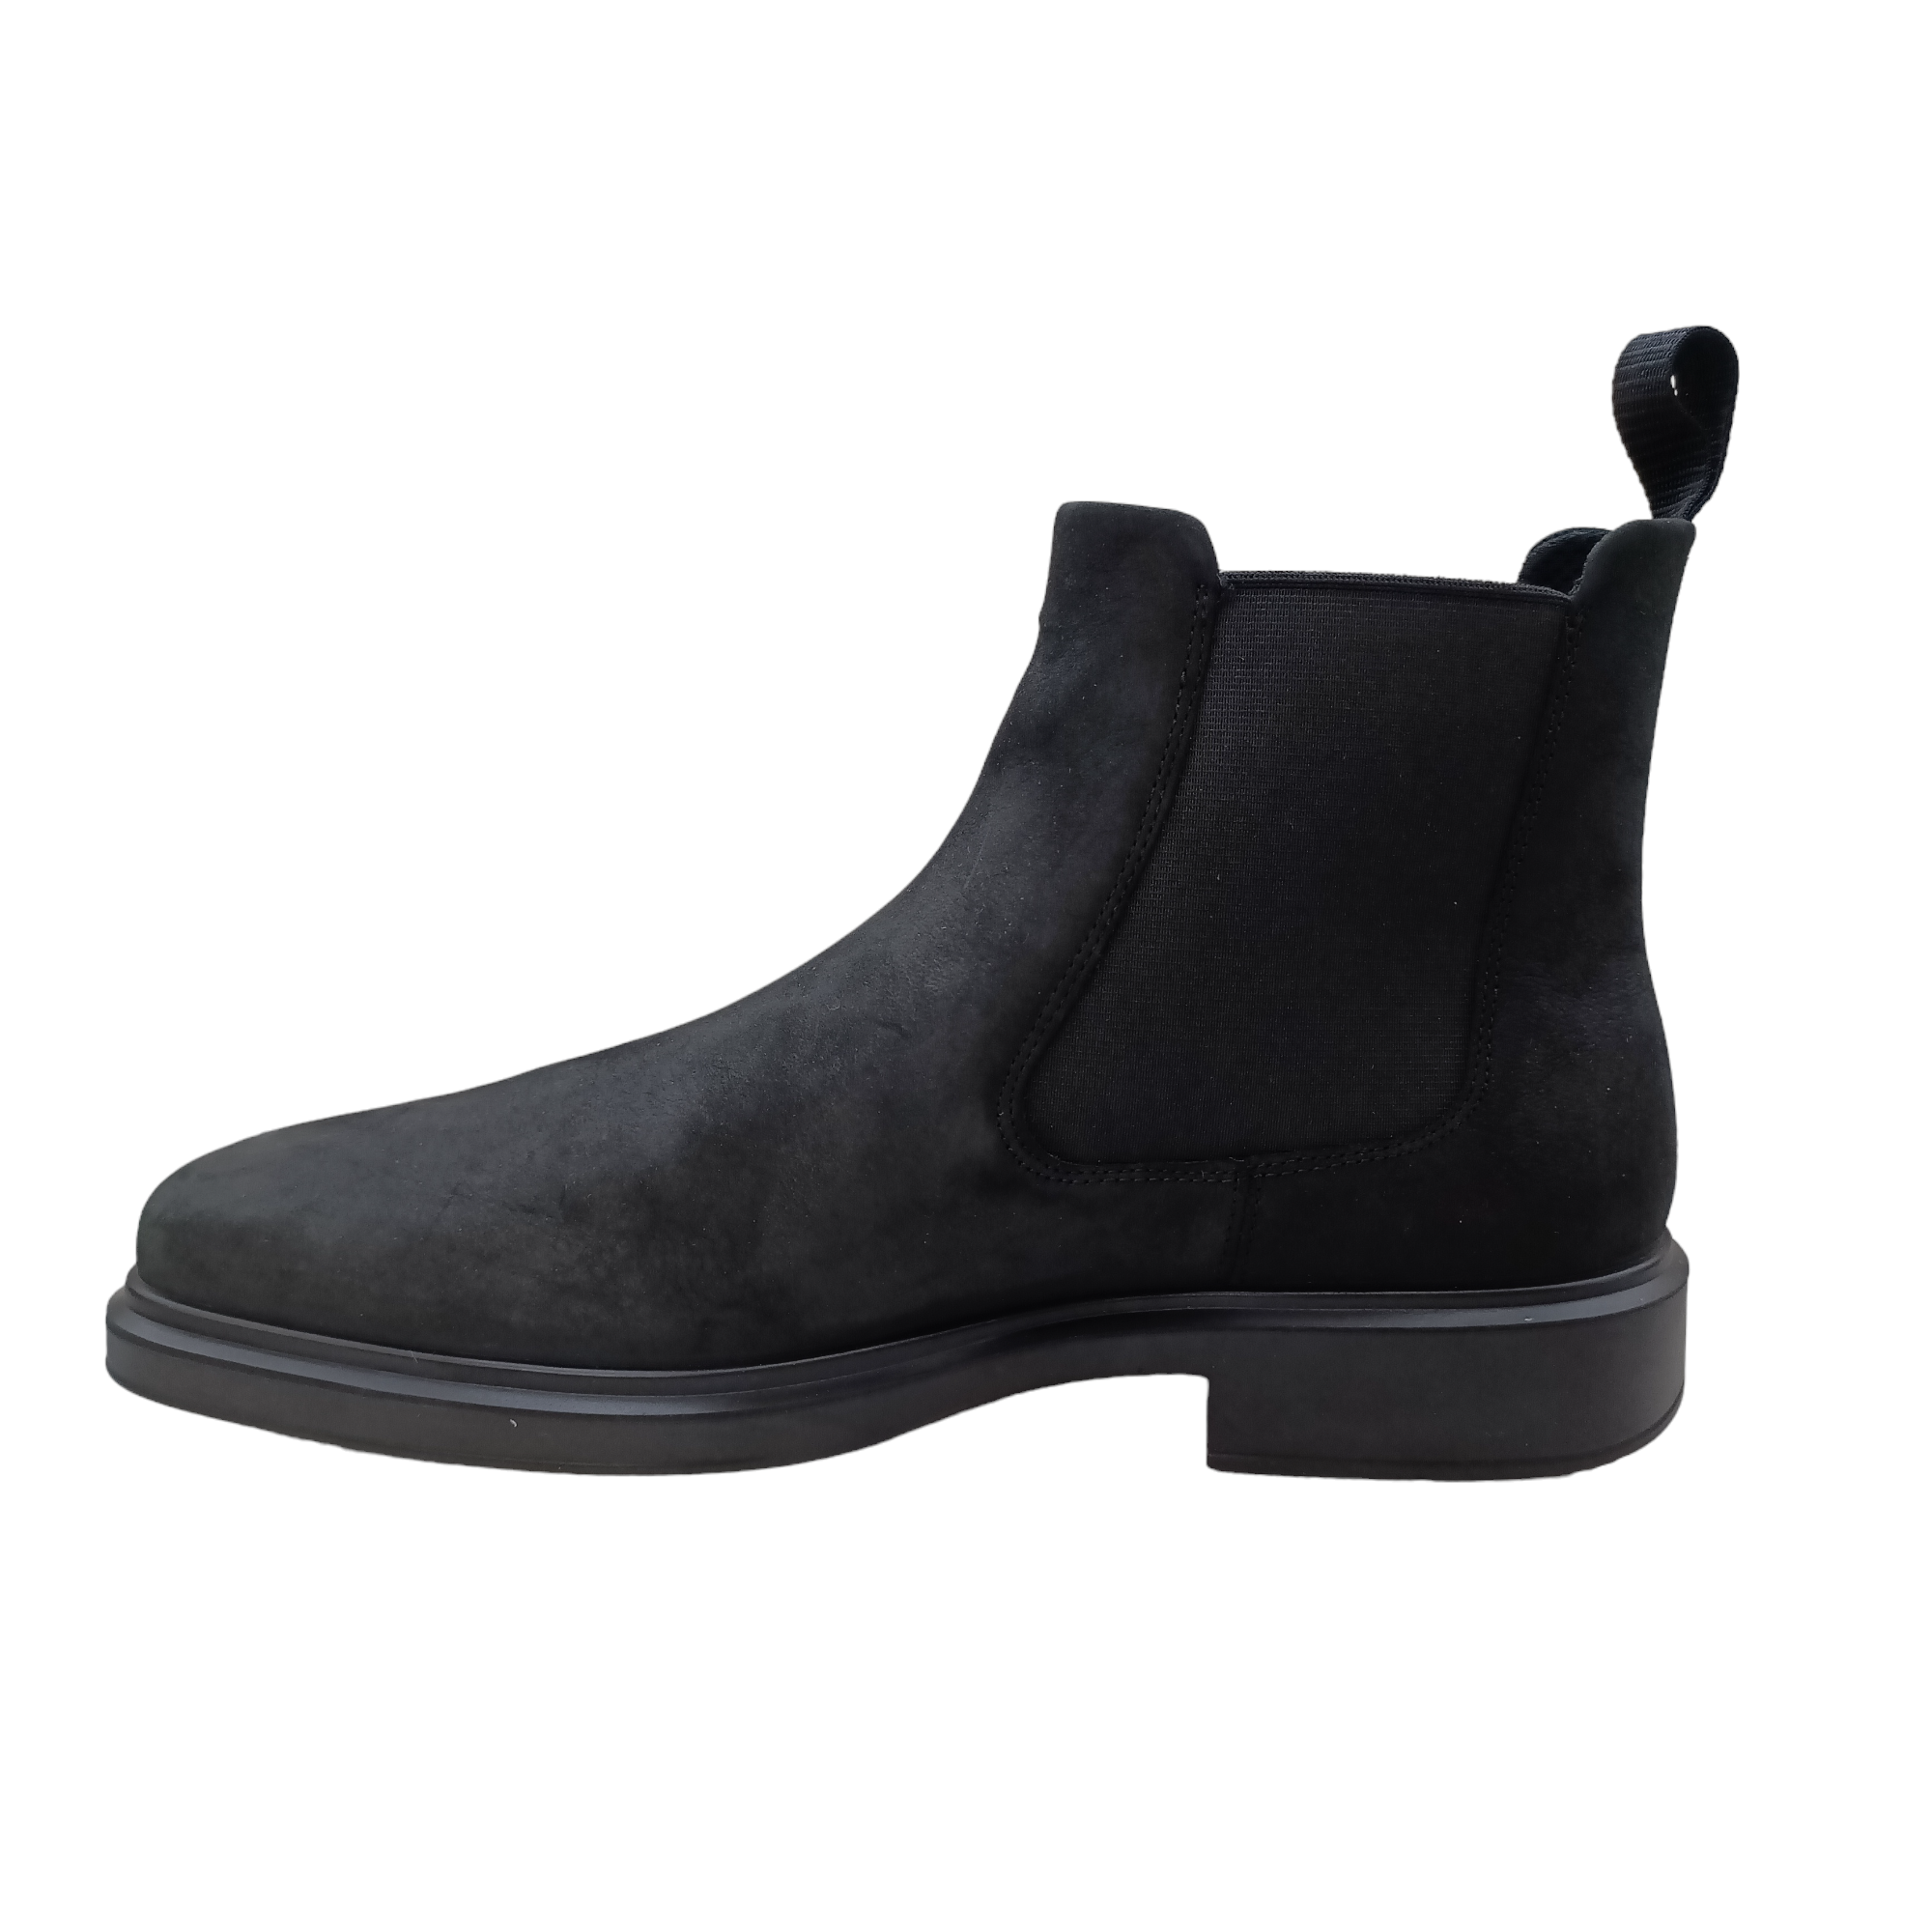 Shop Helsinki 2 M - with shoe&me - from Ecco - Boots - Boot, Mens, Winter